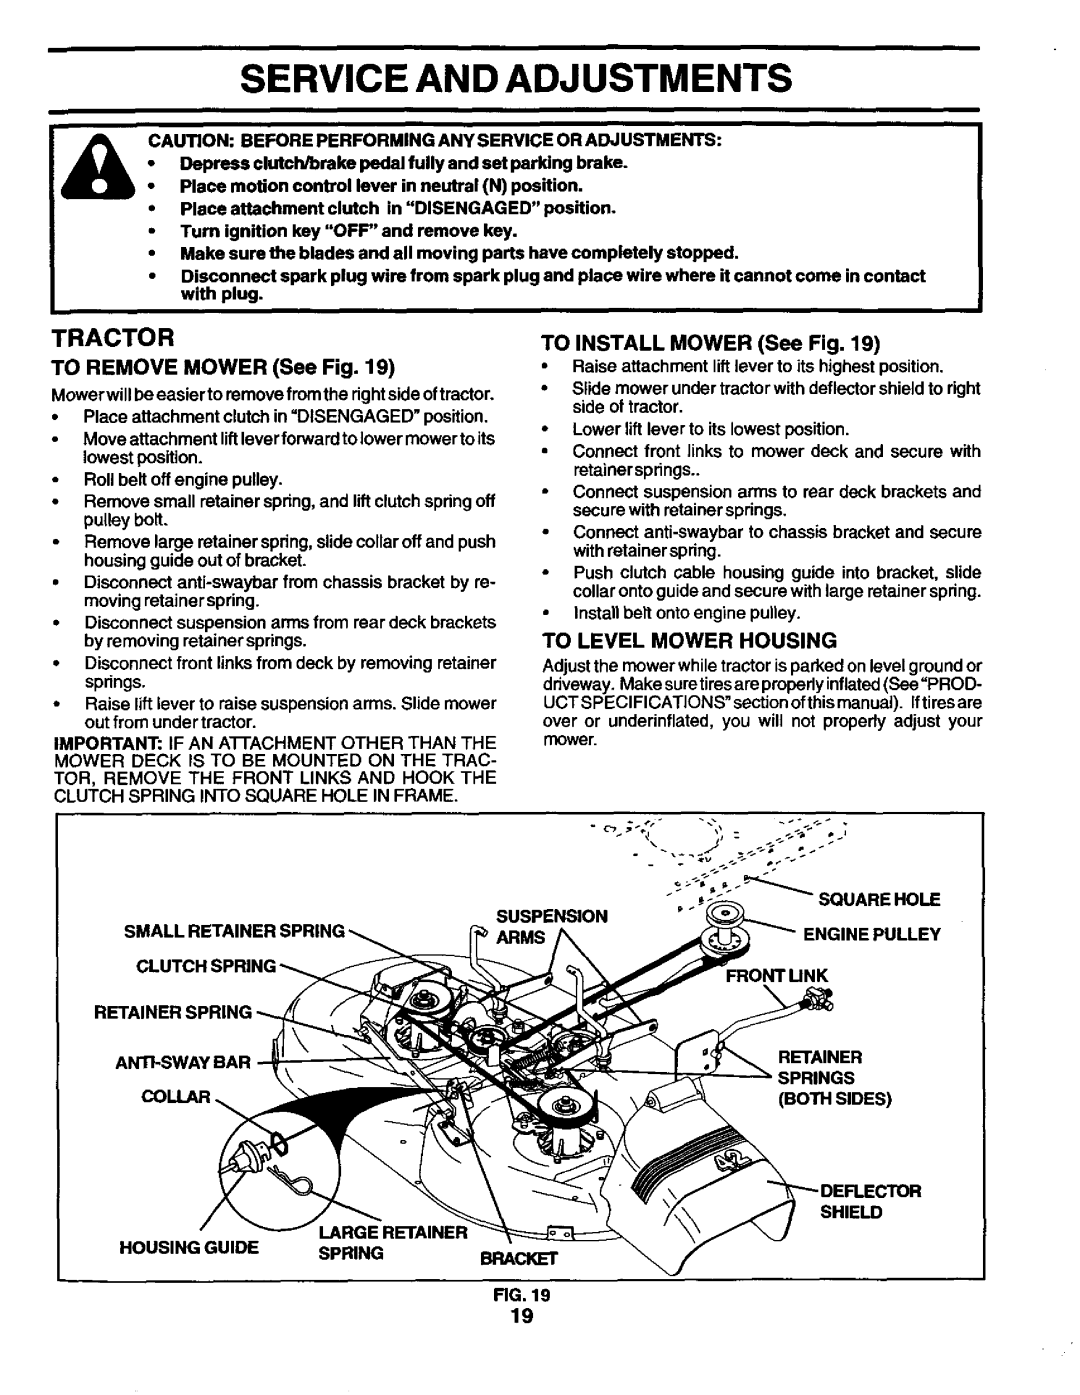 Craftsman 944.602951 owner manual Service And Adjustments, Tractor, TO REMOVE MOWER See Fig, TO INSTALL MOWER See Fig 